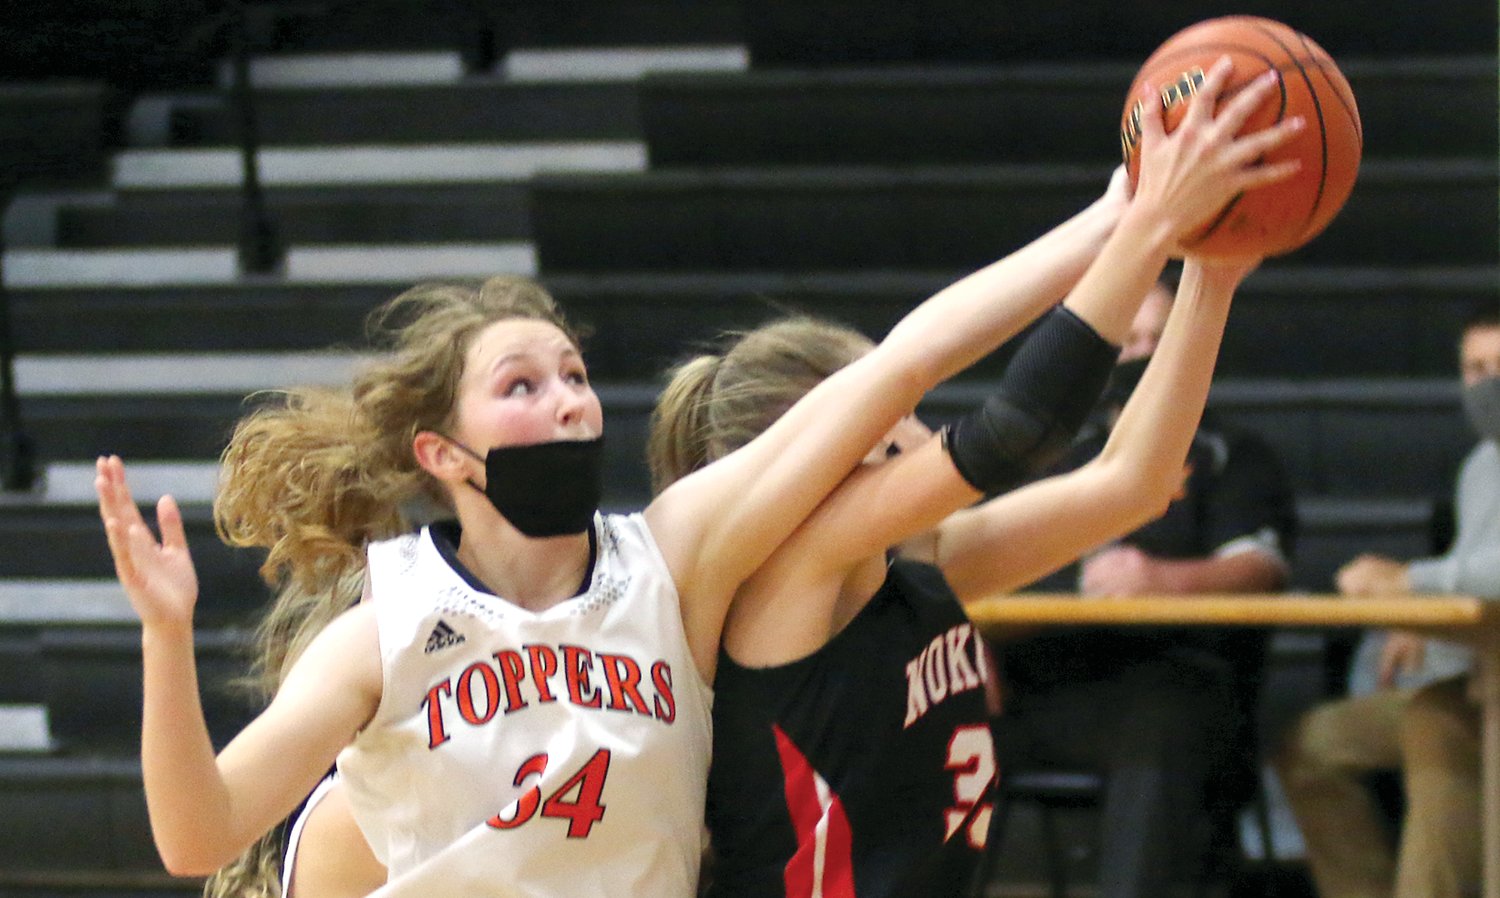 Hillsboro's Alex Frailey (#34) tries to pry away a rebound from Nokomis' Emily Cress during the Montgomery County clash on Wednesday, Nov. 17. Frailey finished with 13 points in the Toppers' 44-29 win over the Redskins, their ninth straight against their neighbors along Rt. 16.